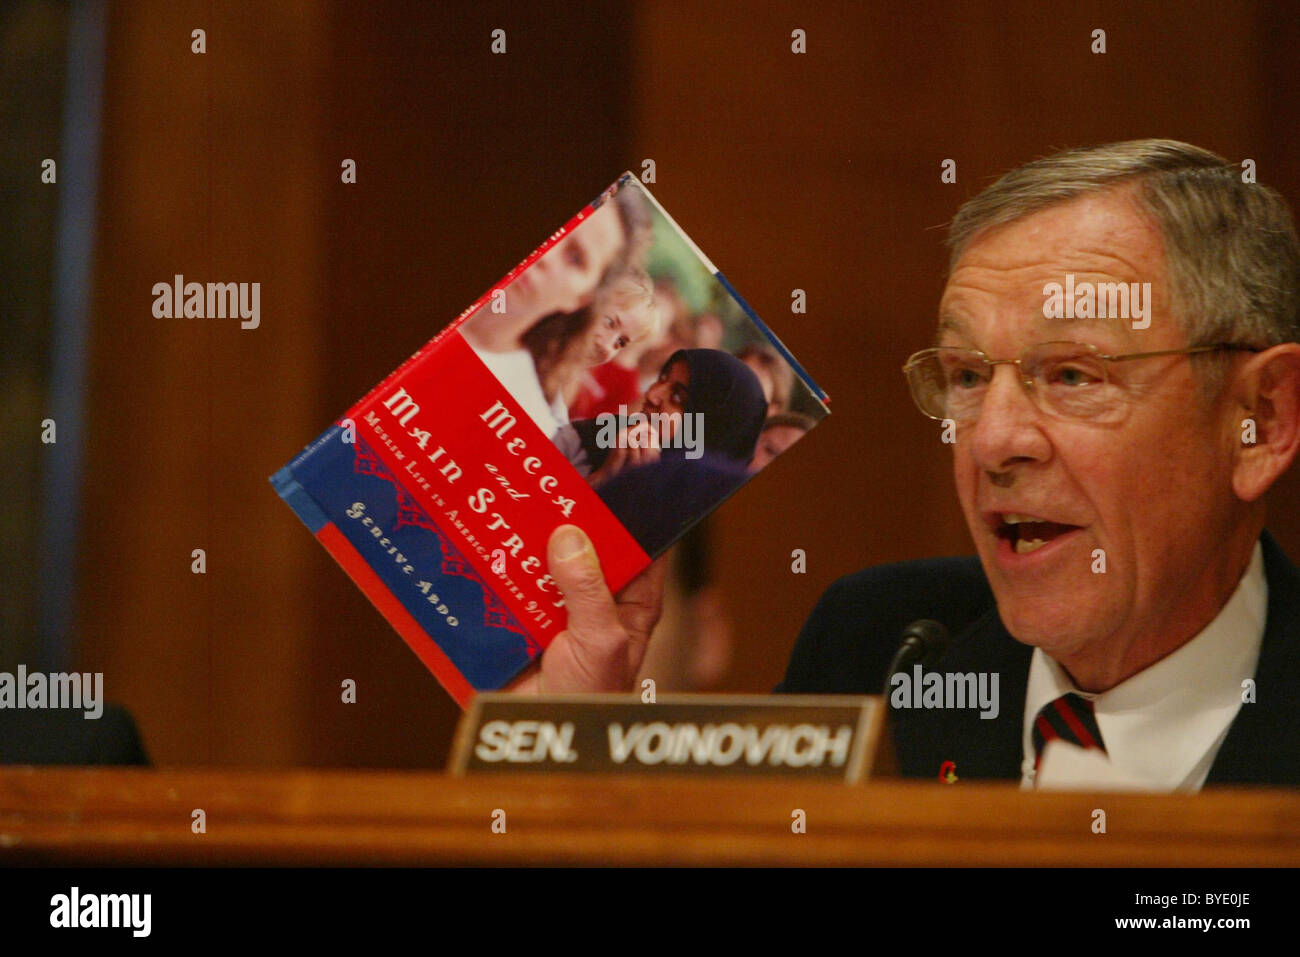 Senator George V. Voinovich (R-OH) displays a book he says touches on the concerns about the radicalization of Islam in America Stock Photo